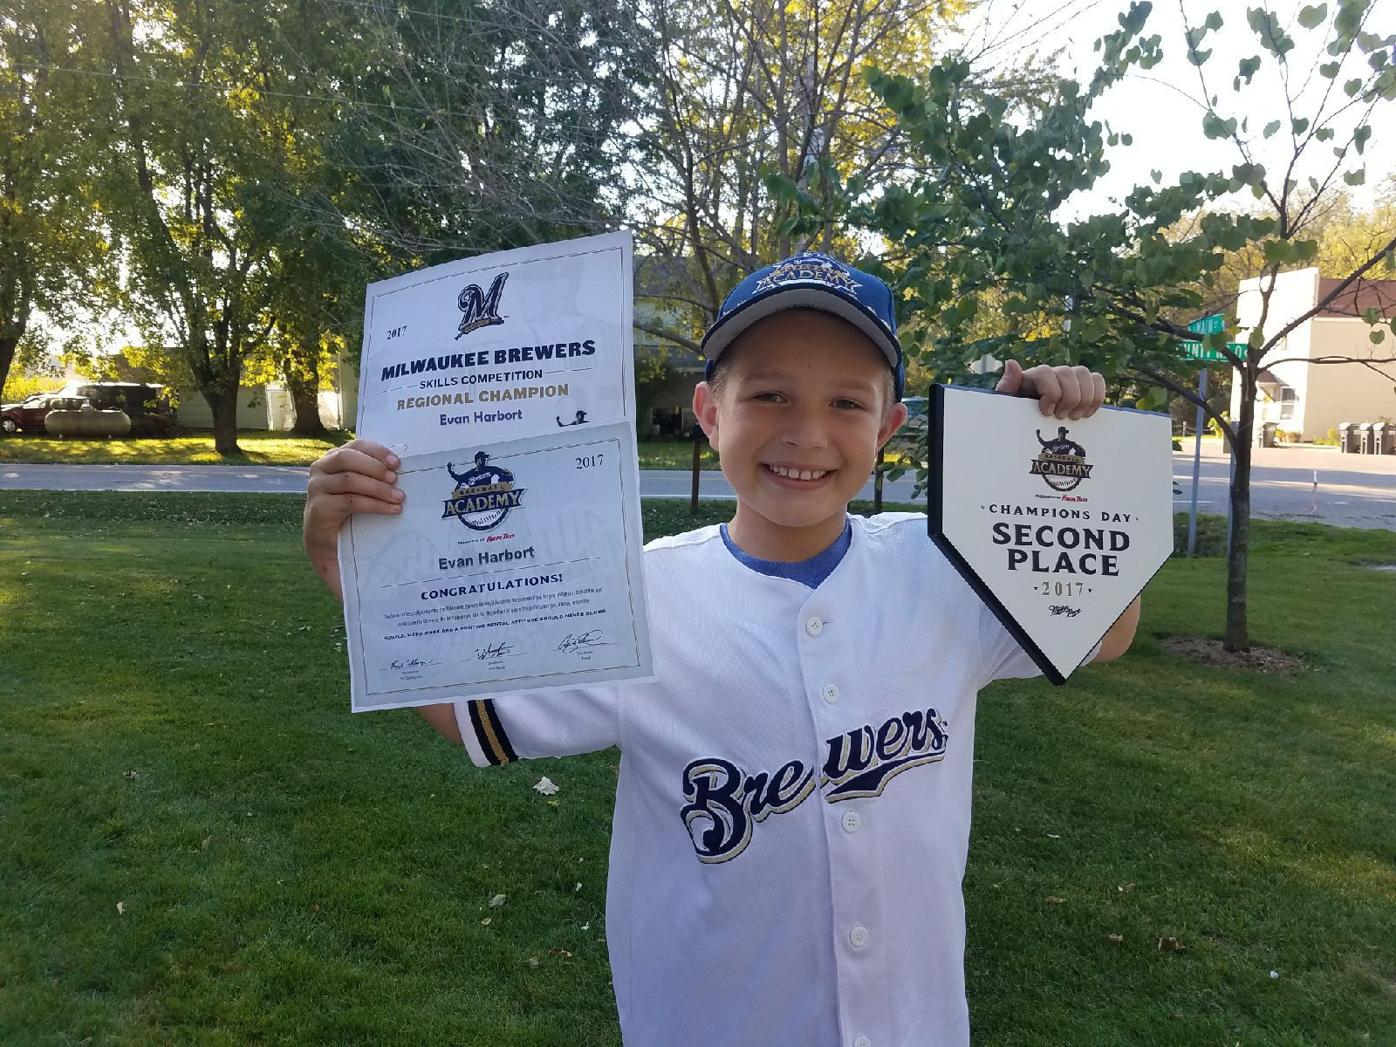 Brewers Baseball Academy Camps